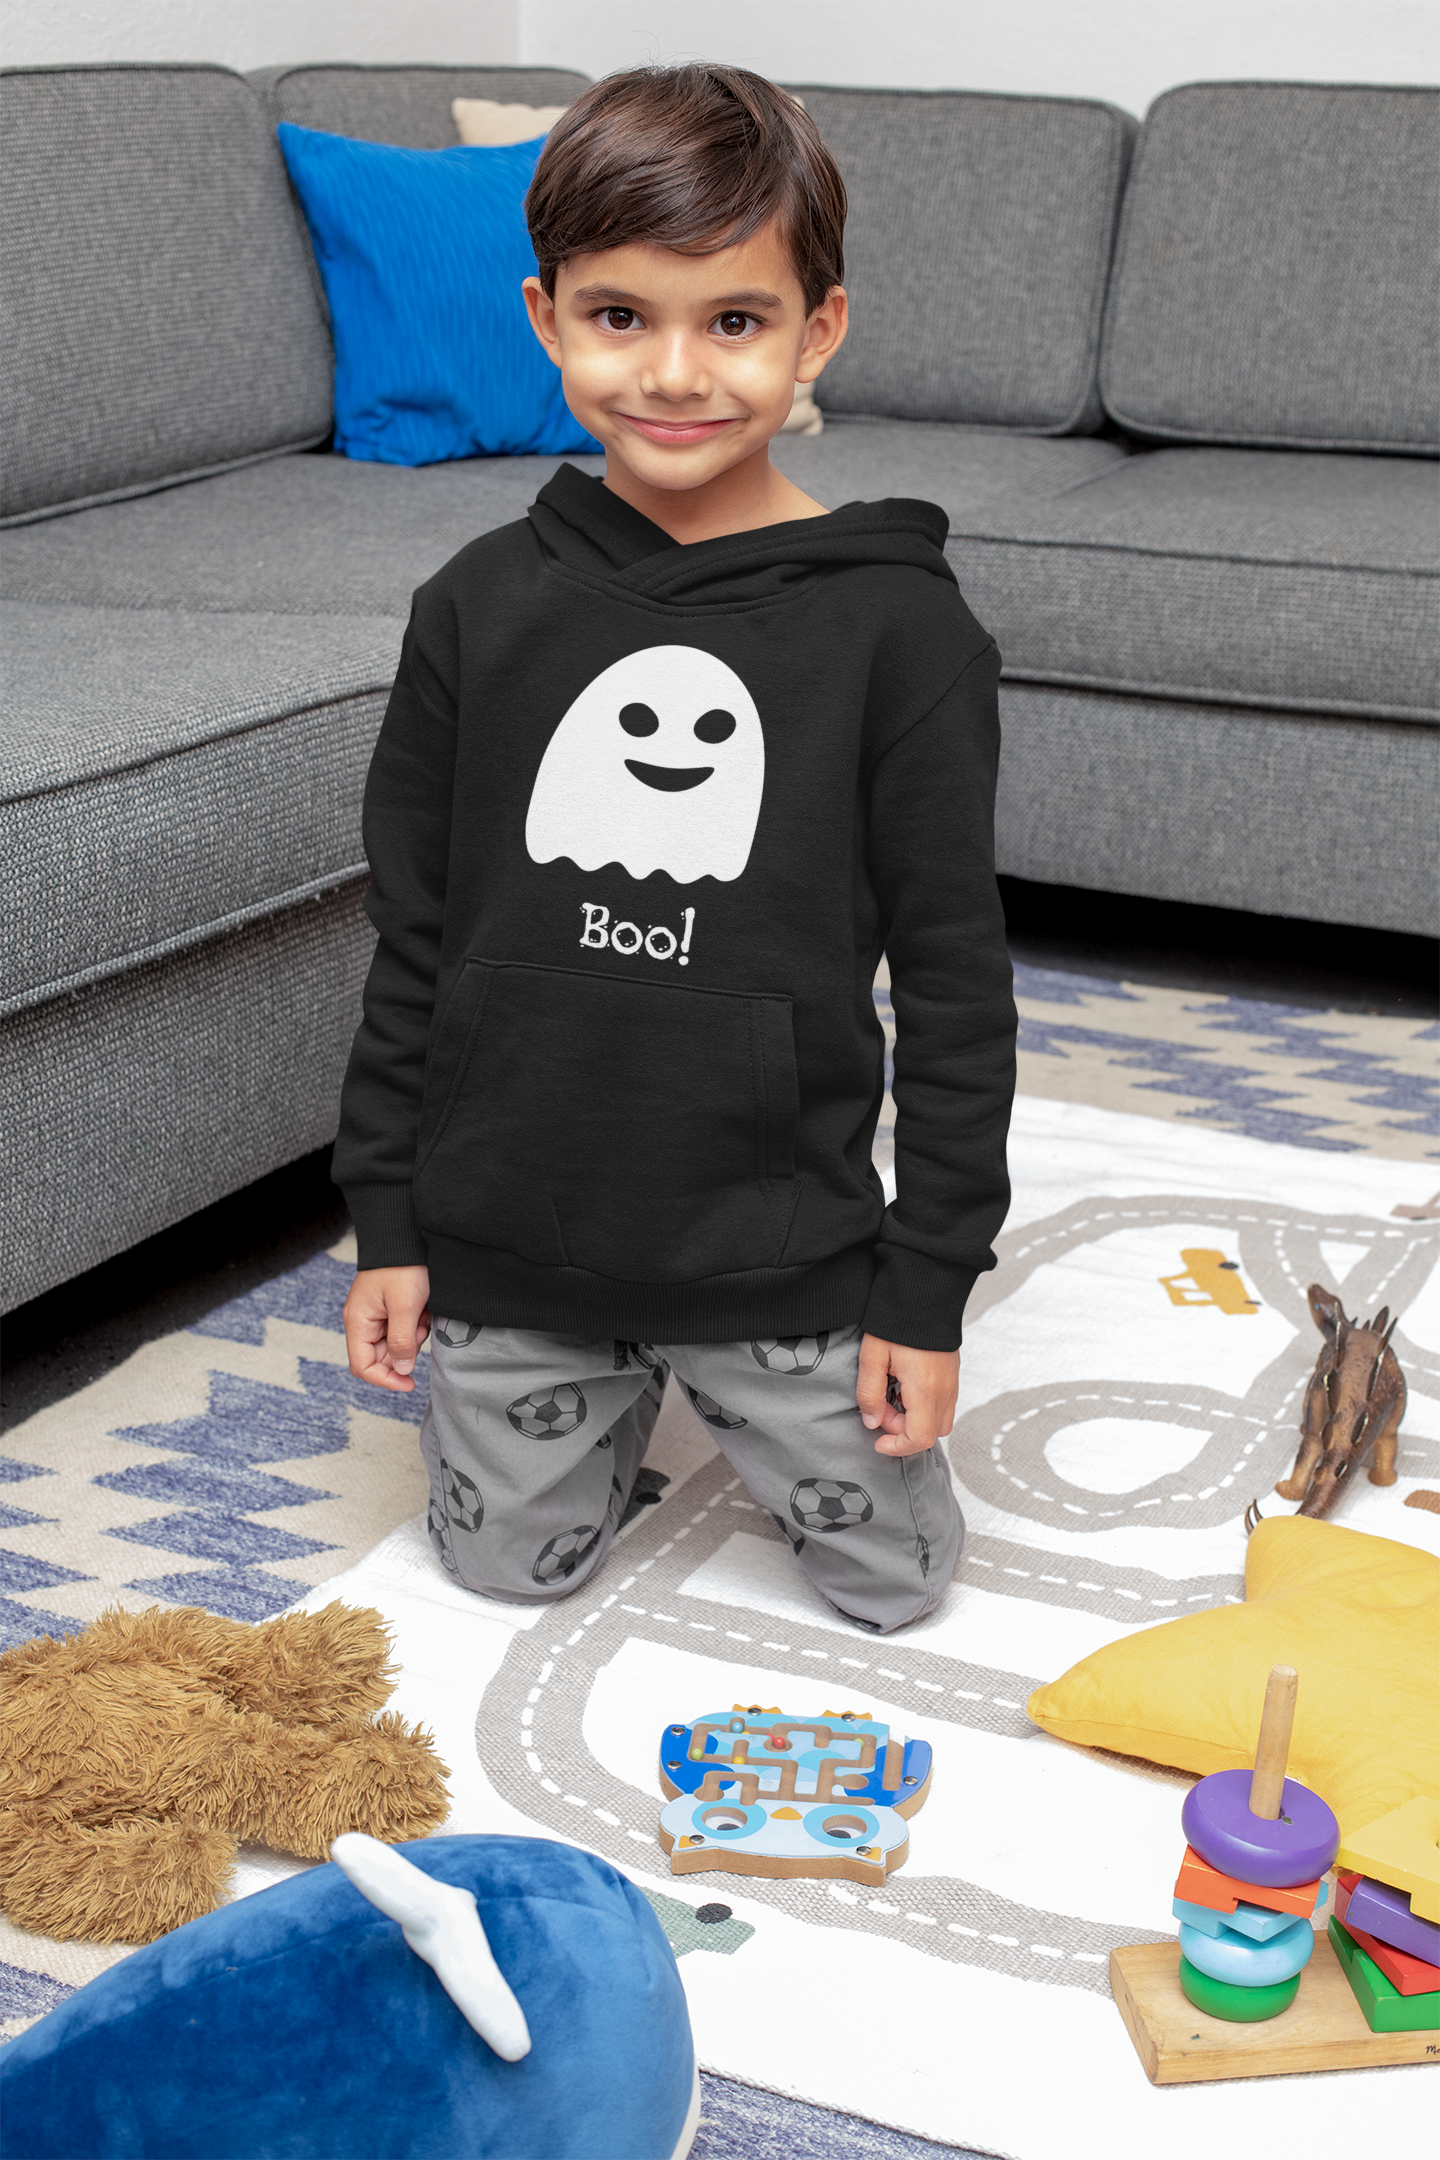 Boo! Ysbryd Childs Hoodie | Welsh Kids Clothes